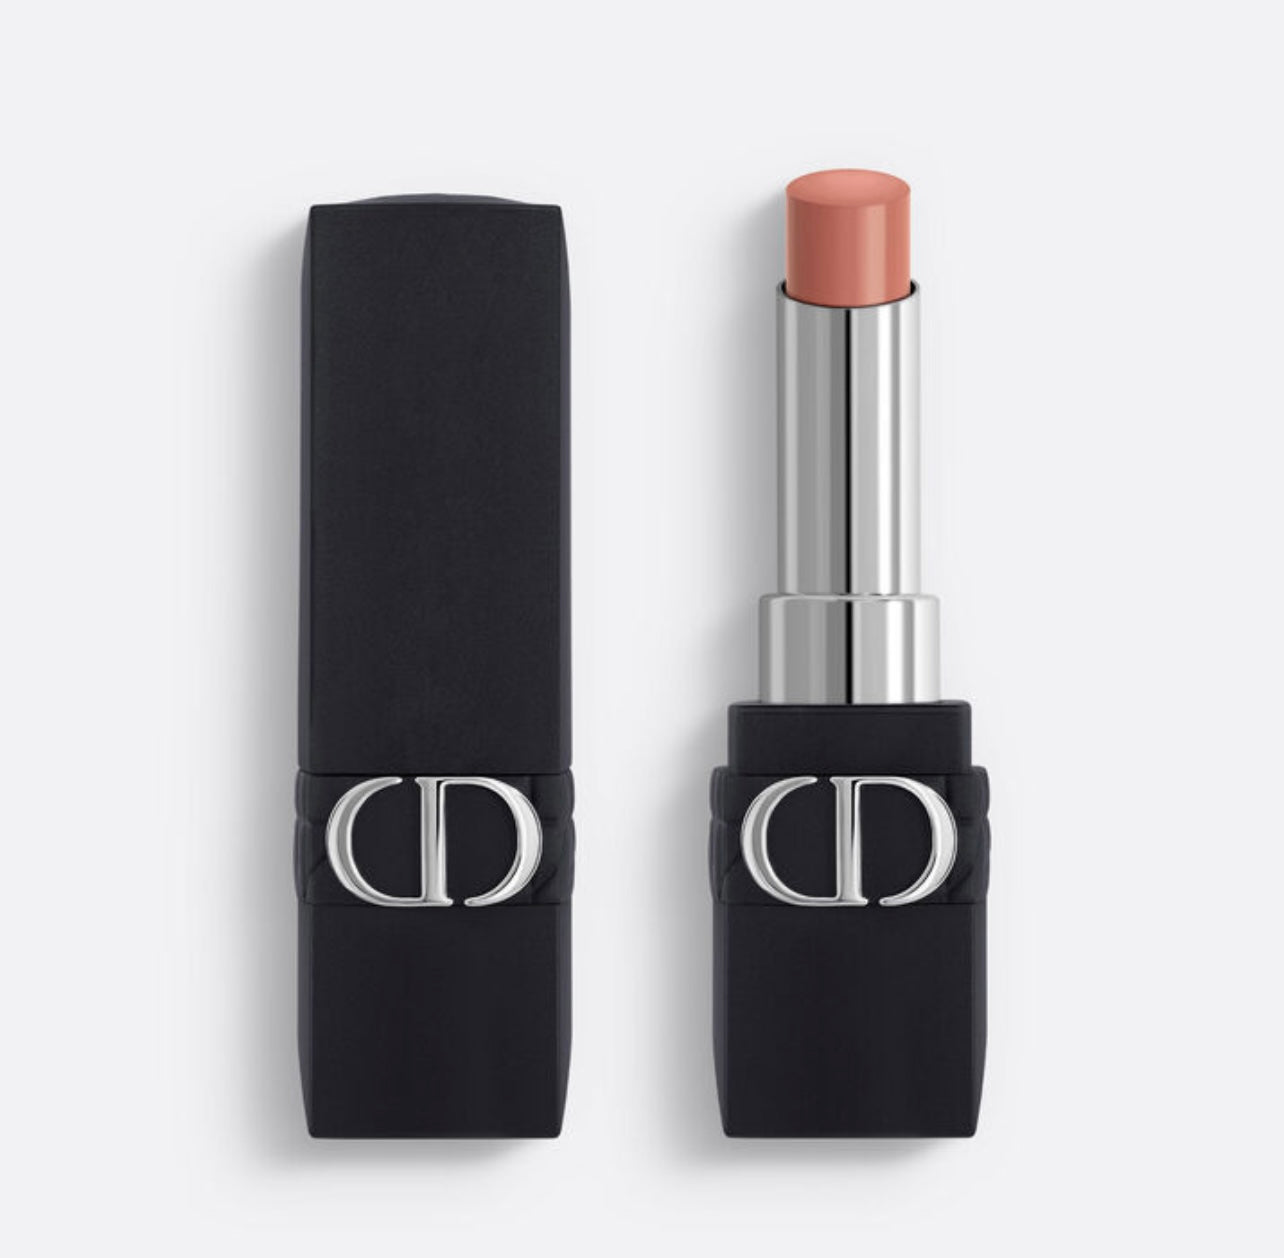 Dior ROUGE FOREVER Transfer-Proof Lipstick in 100 FOREVER NUDE LOOK